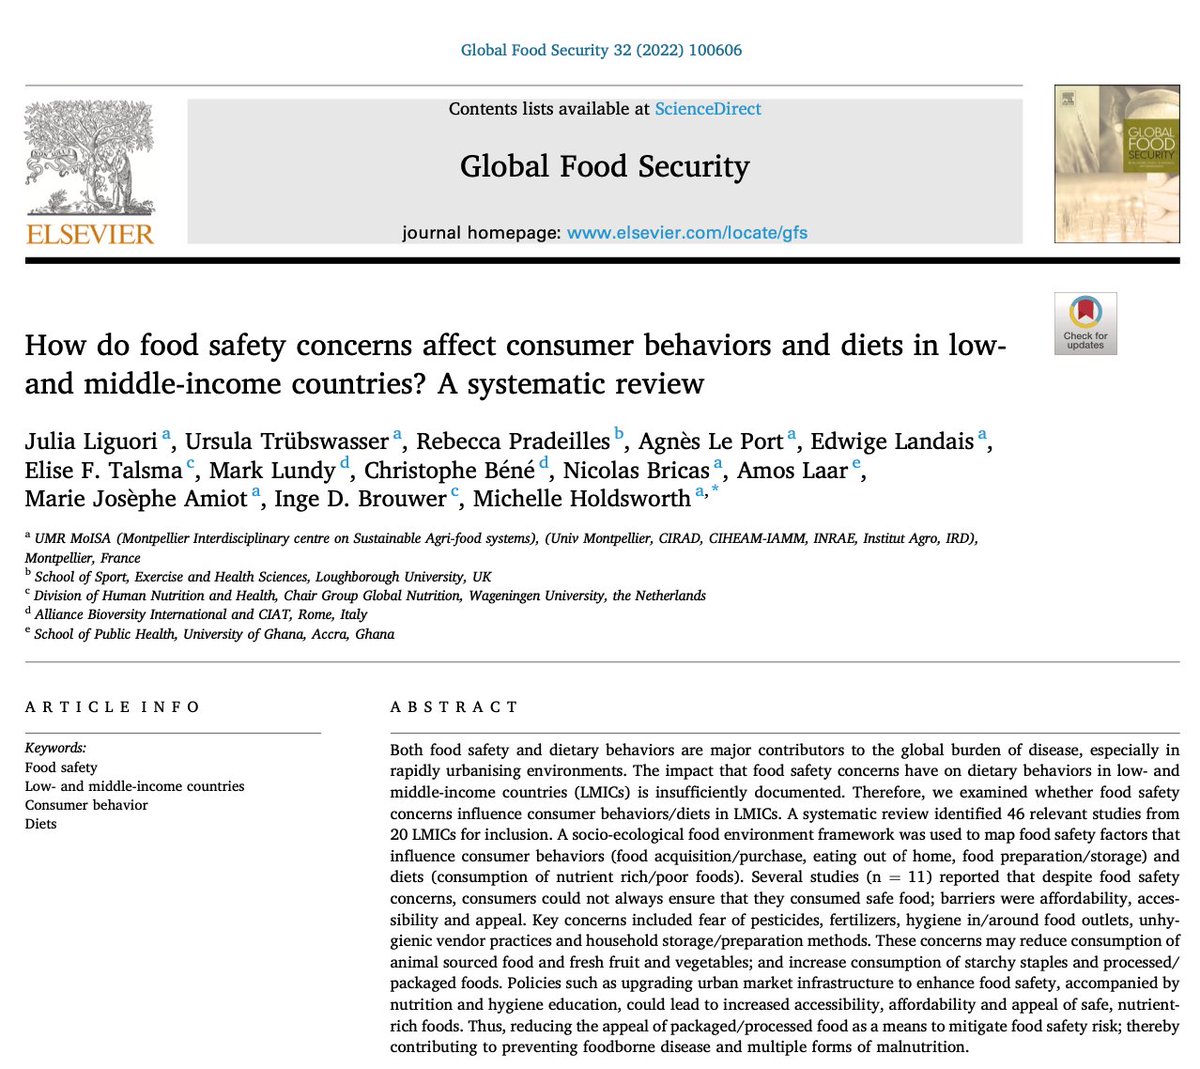 In #LMICs, #foodsafety concerns drive #foodchoices. These concerns may play a role in decisions to consume #processed/#packaged foods & #starches/#staples. A new review by @UrsulaTruebs @markincolombia & #DFCgrantees @alaar @ProfMHoldsworth explored: sciencedirect.com/science/articl…